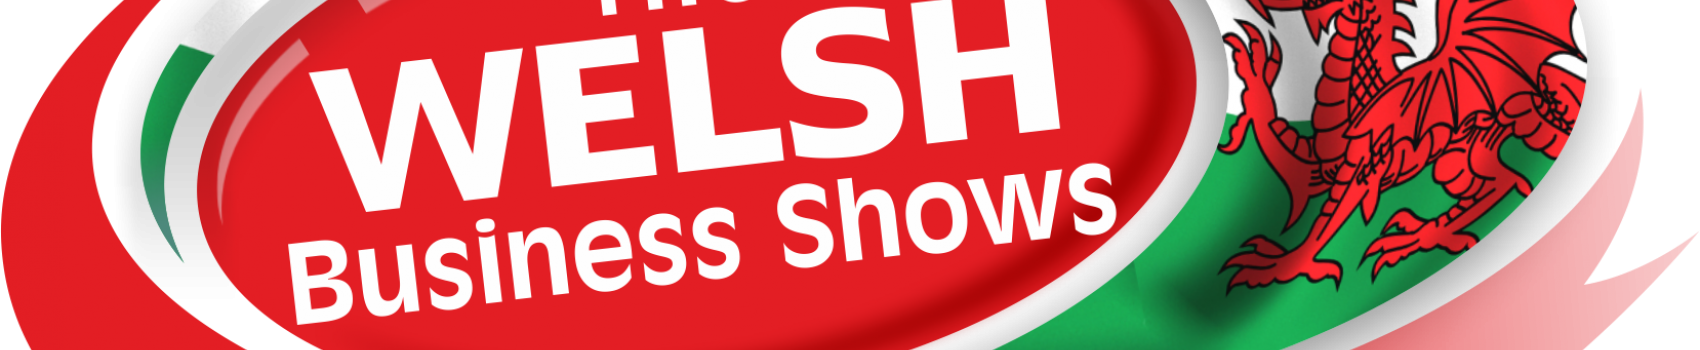 The Welsh Business Show